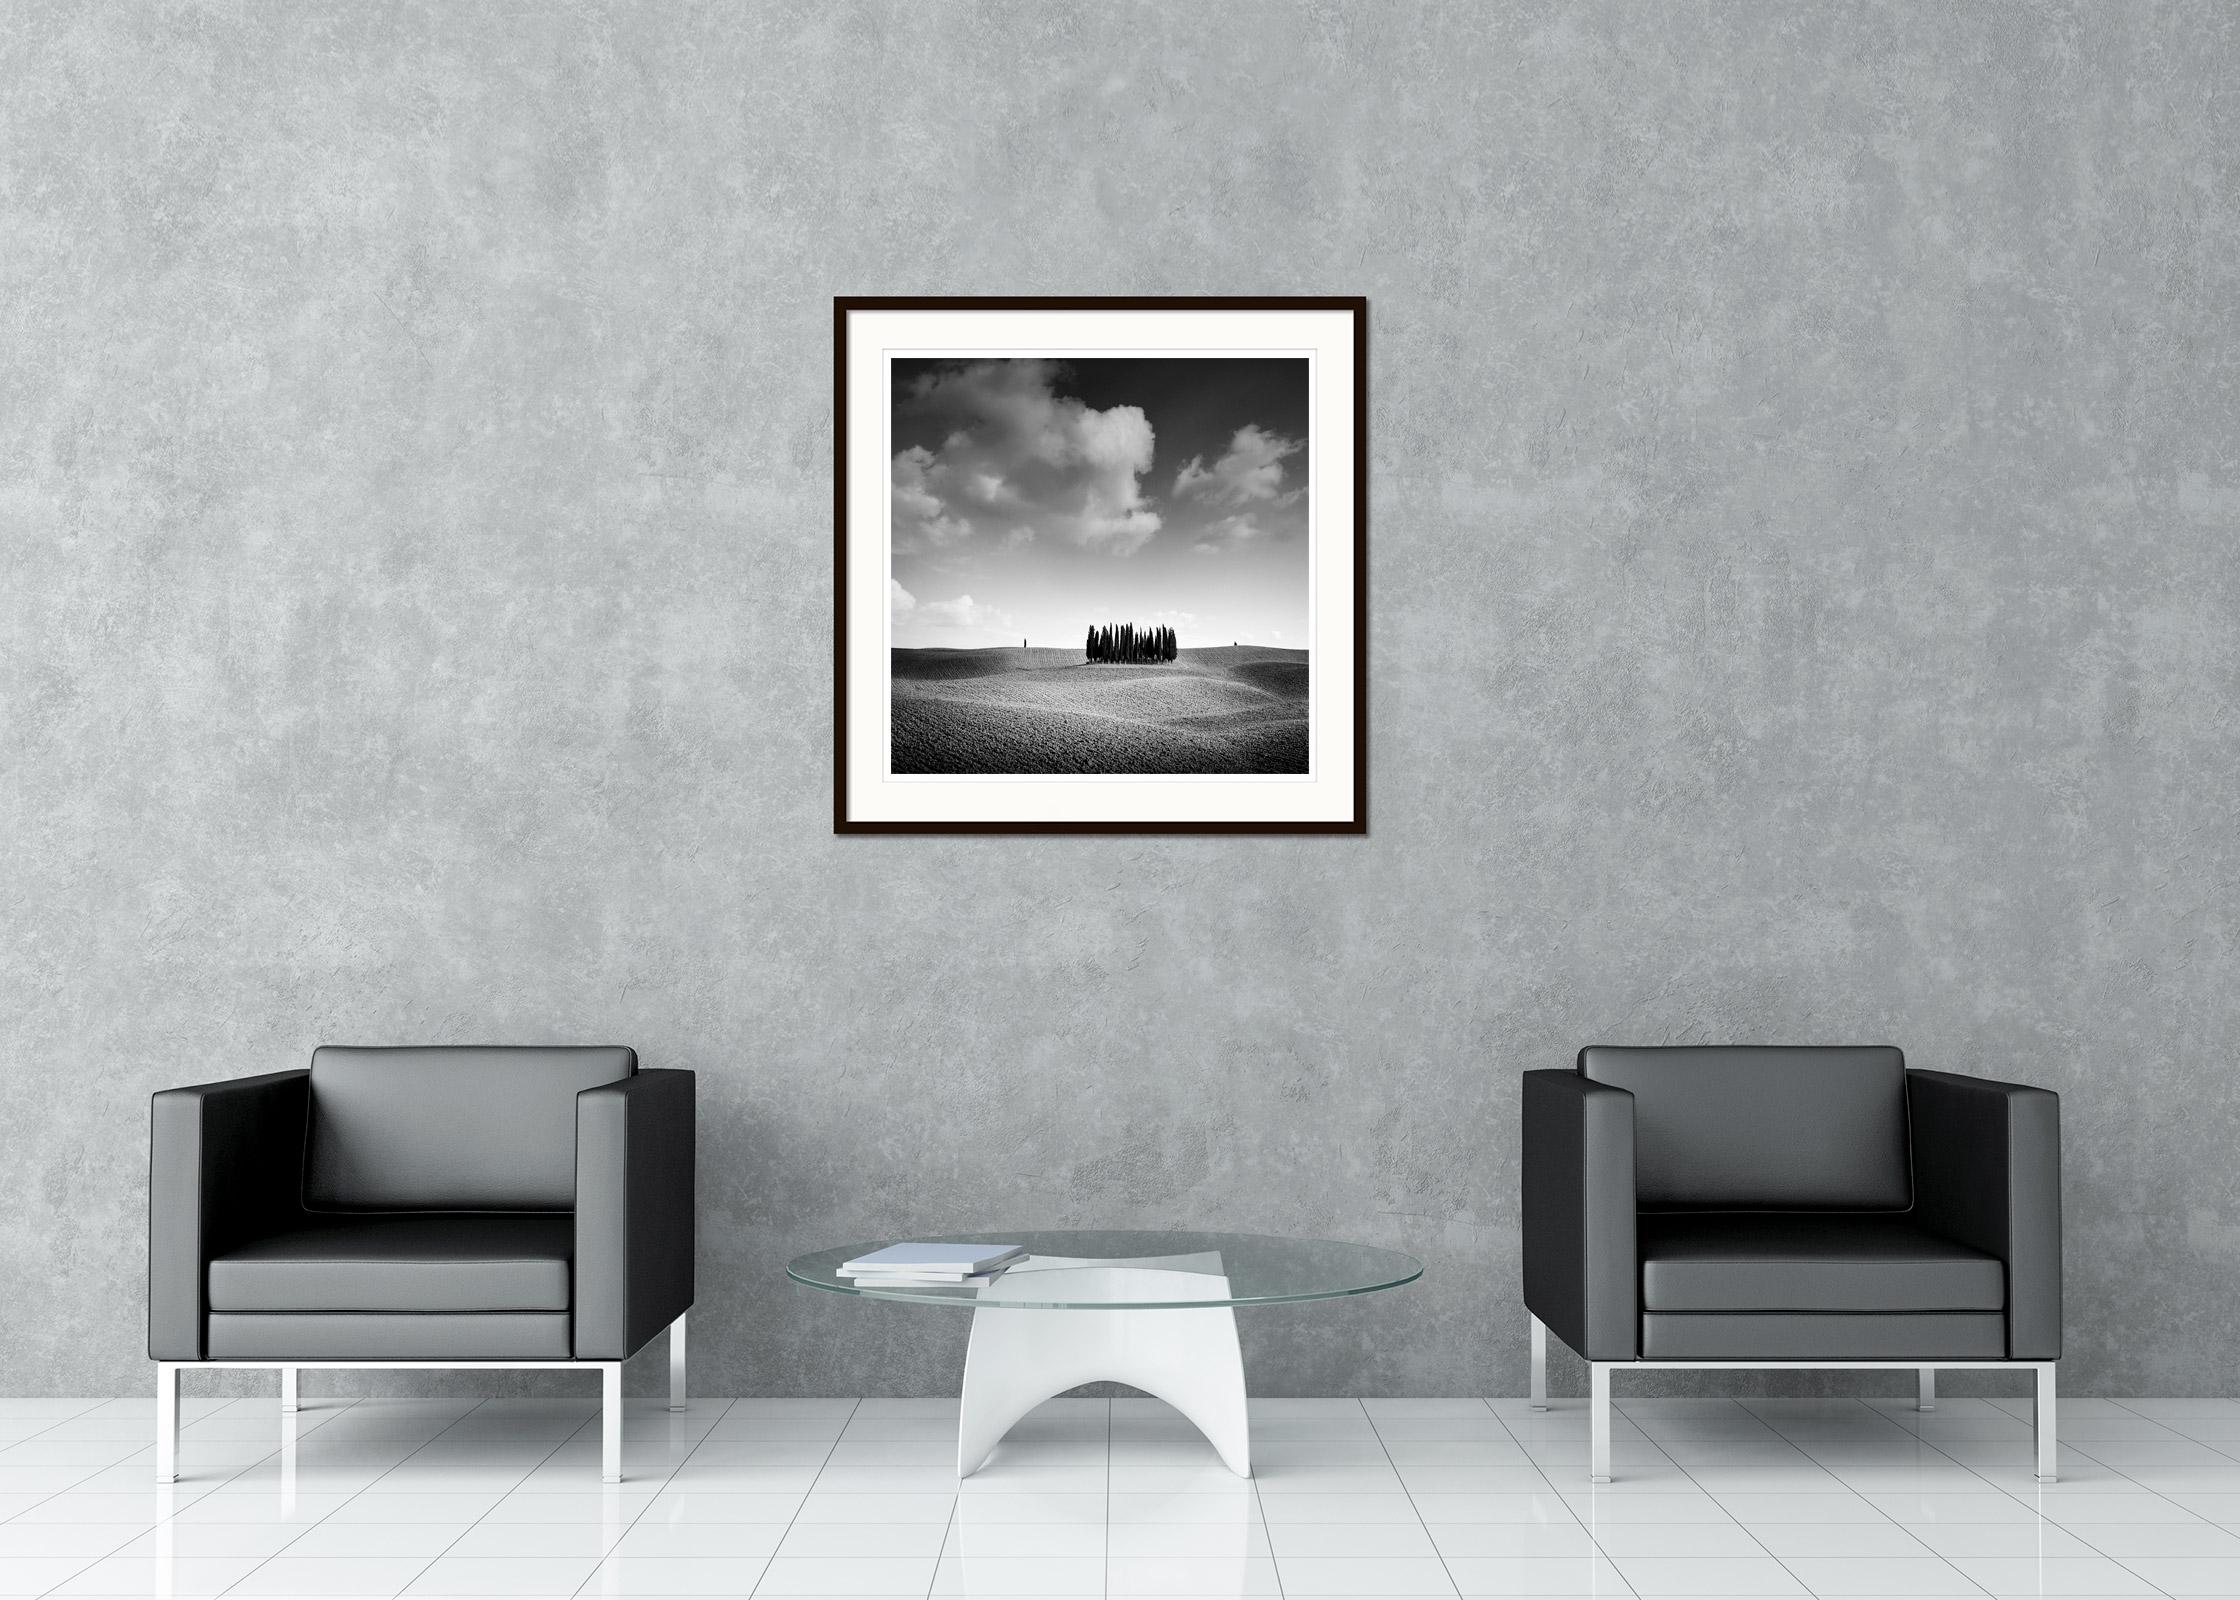 Black and white fine art landscape photography print. Famous group of cypress trees in autumn on the hills of Tuscany, Italy. Archival pigment ink print, edition of 9. Signed, titled, dated and numbered by artist. Certificate of authenticity